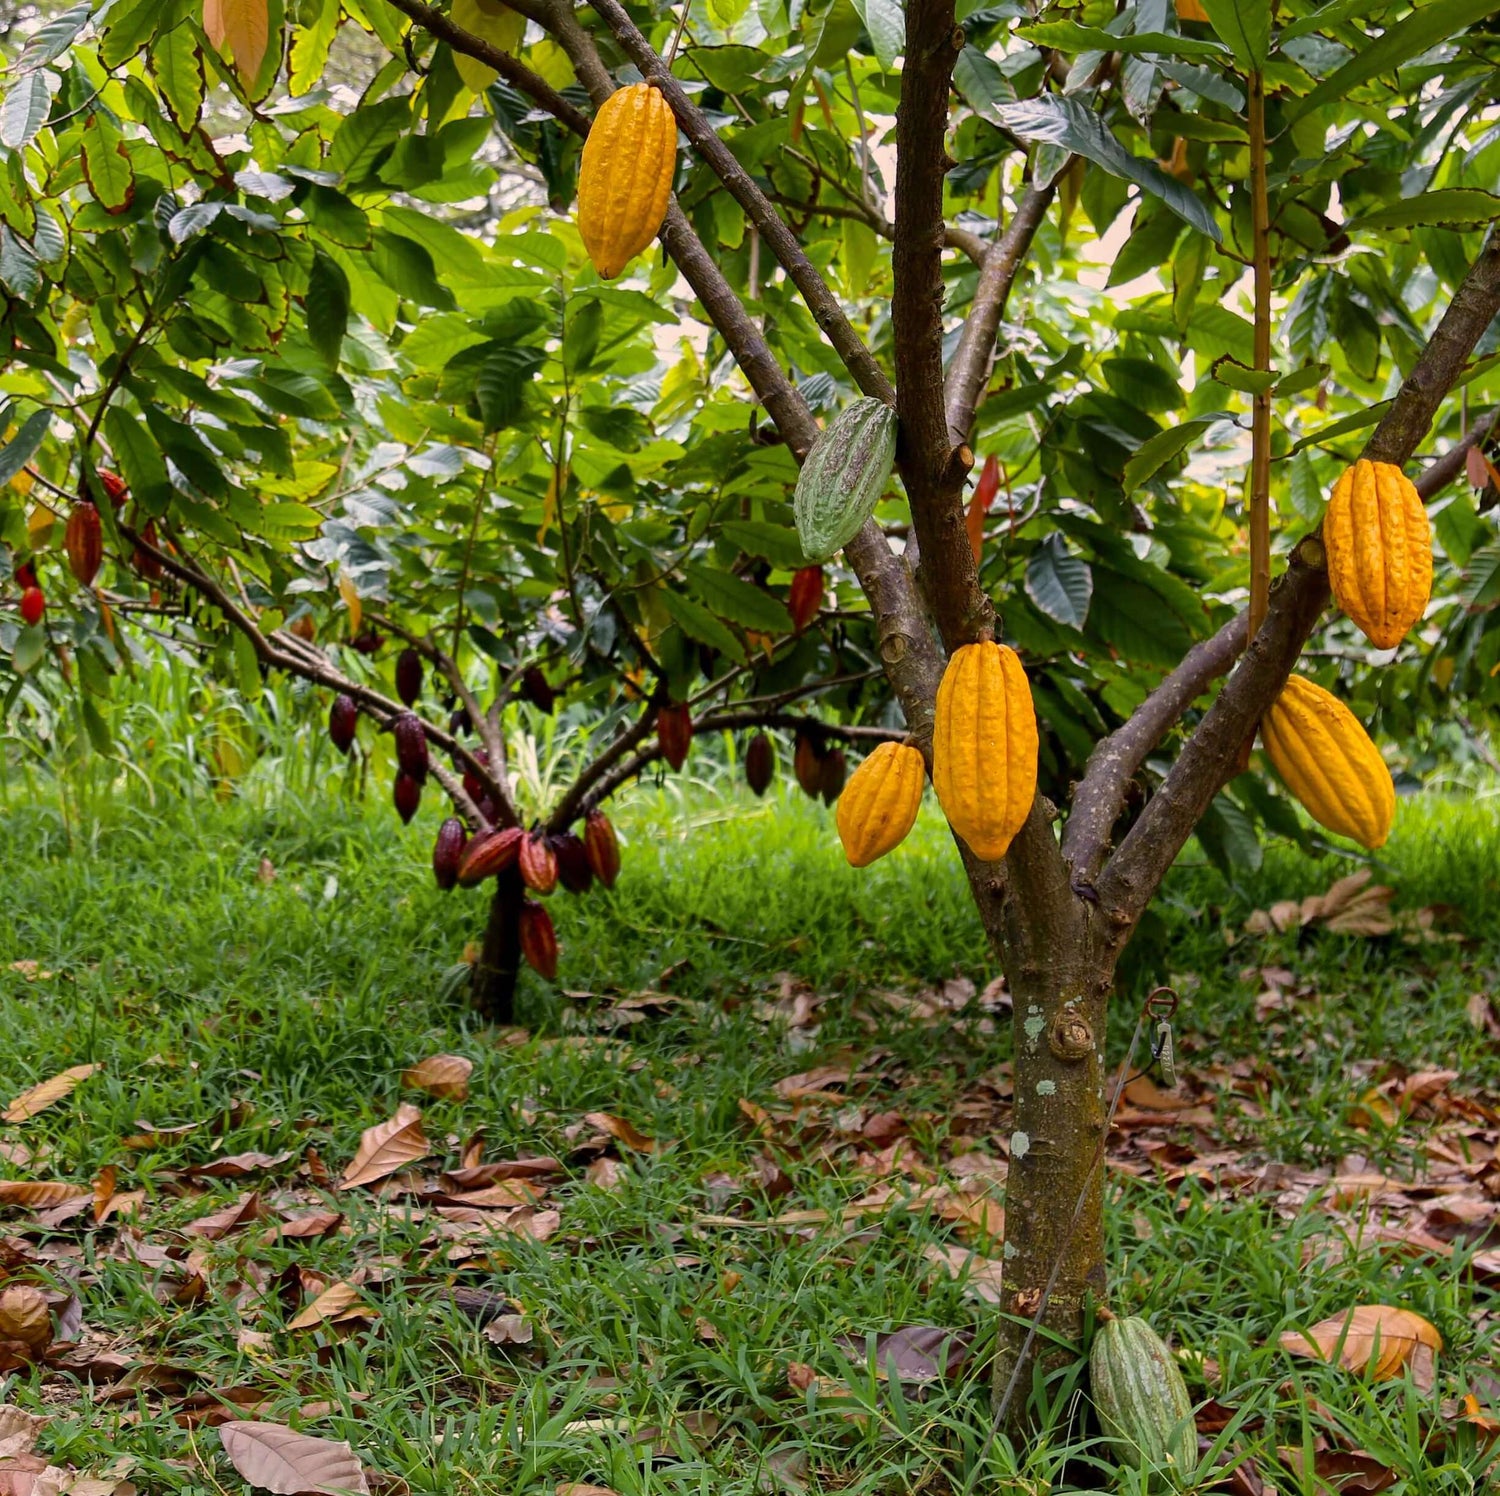 Image of cacao orchard